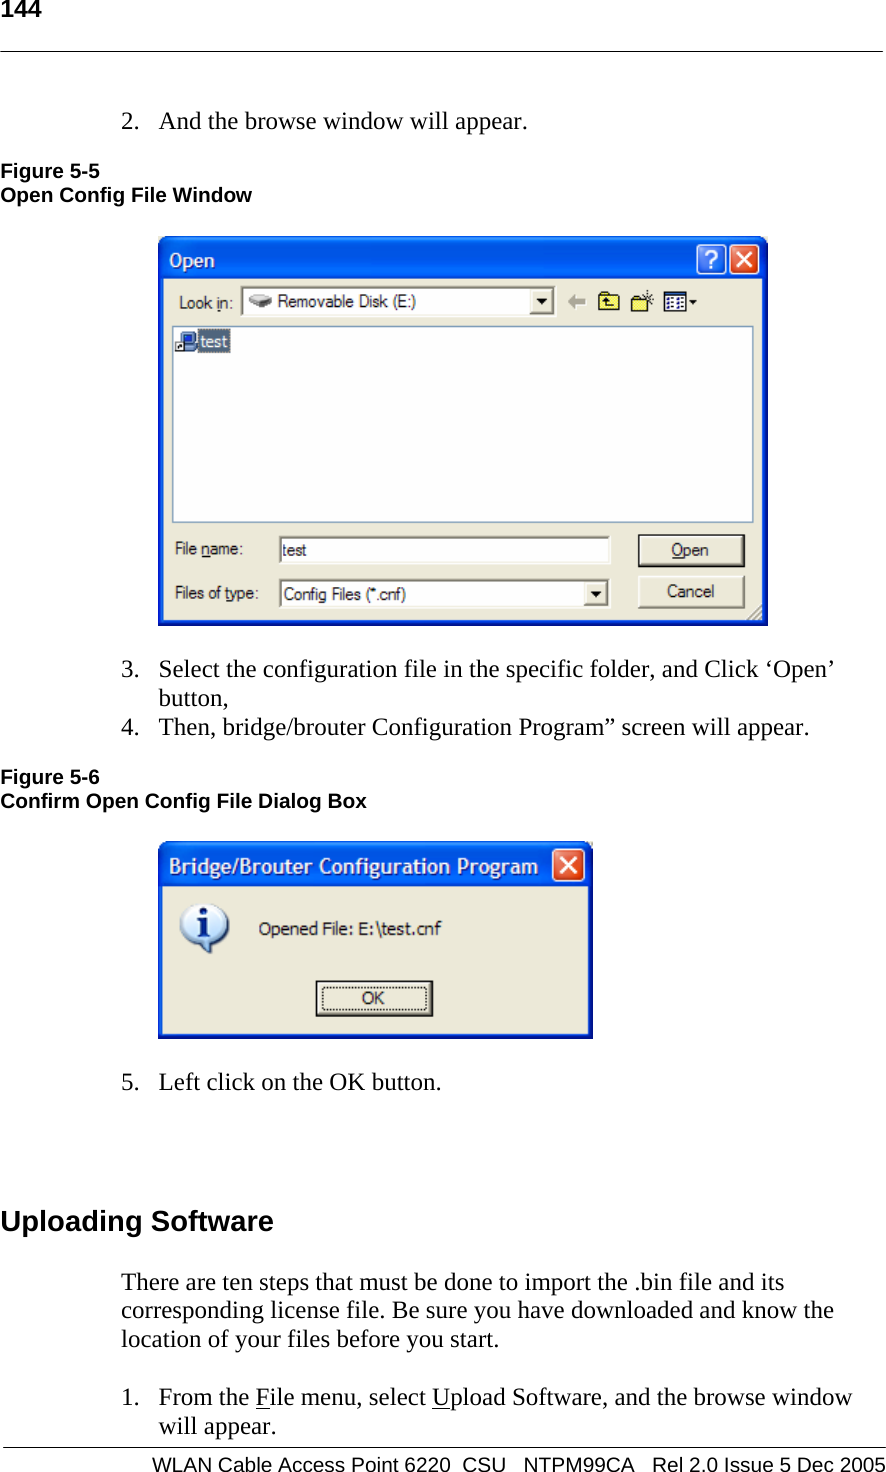   144    WLAN Cable Access Point 6220  CSU   NTPM99CA   Rel 2.0 Issue 5 Dec 2005 2. And the browse window will appear.  Figure 5-5 Open Config File Window    3. Select the configuration file in the specific folder, and Click ‘Open’ button, 4. Then, bridge/brouter Configuration Program” screen will appear.  Figure 5-6 Confirm Open Config File Dialog Box    5. Left click on the OK button.    Uploading Software There are ten steps that must be done to import the .bin file and its corresponding license file. Be sure you have downloaded and know the location of your files before you start. 1. From the File menu, select Upload Software, and the browse window will appear. 